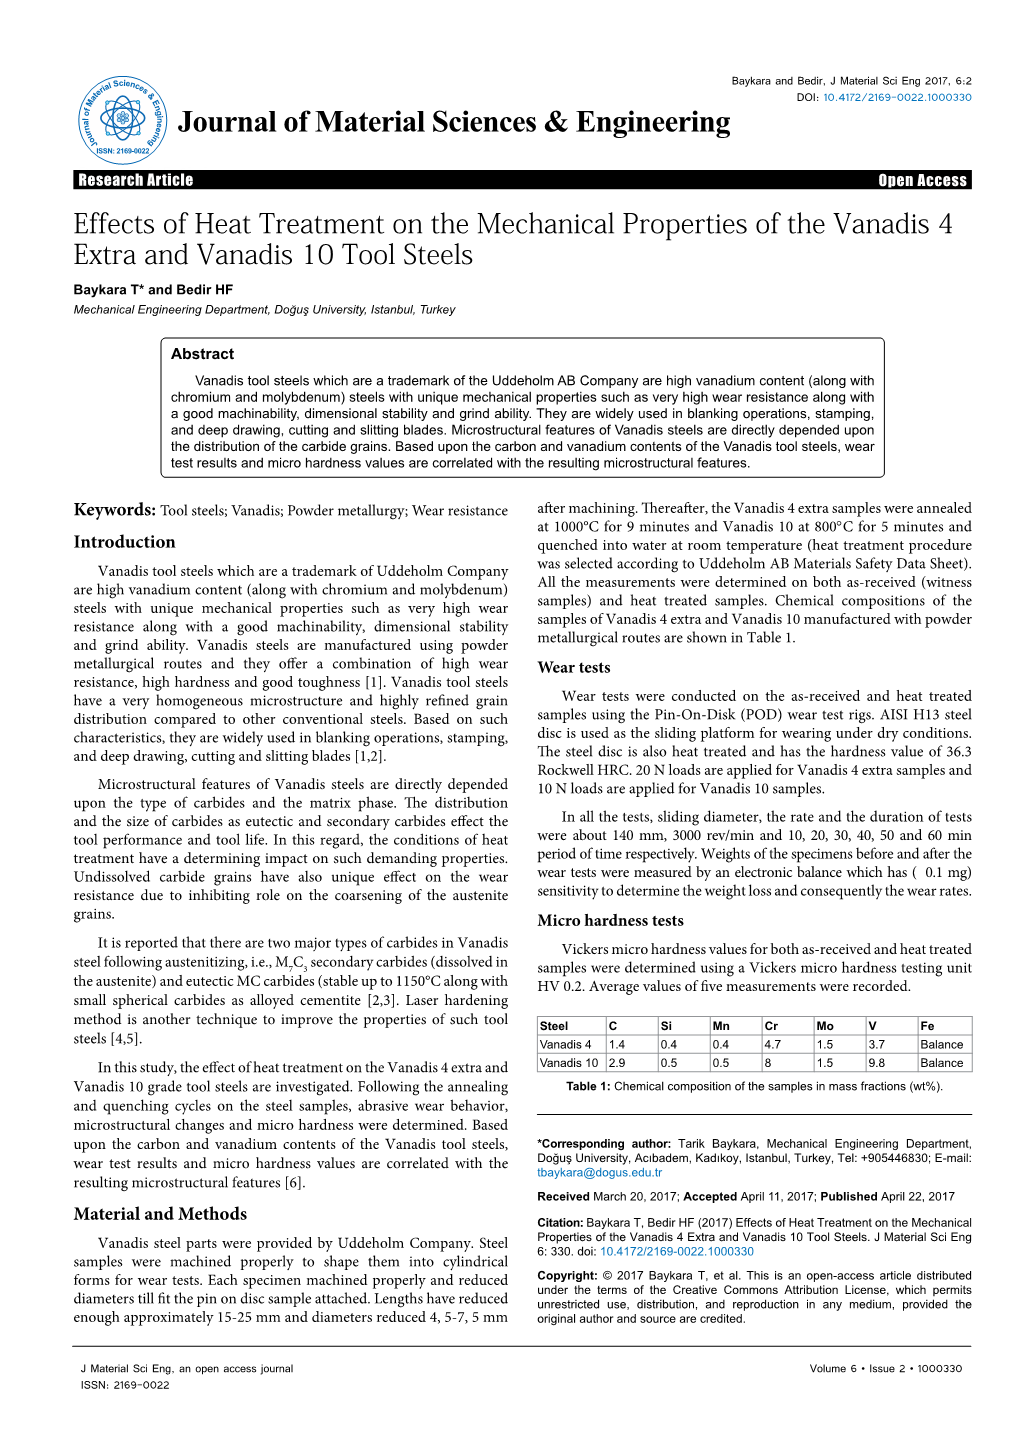 Effects of Heat Treatment on the Mechanical Properties of the Vanadis 4 Extra and Vanadis 10 Tool Steels